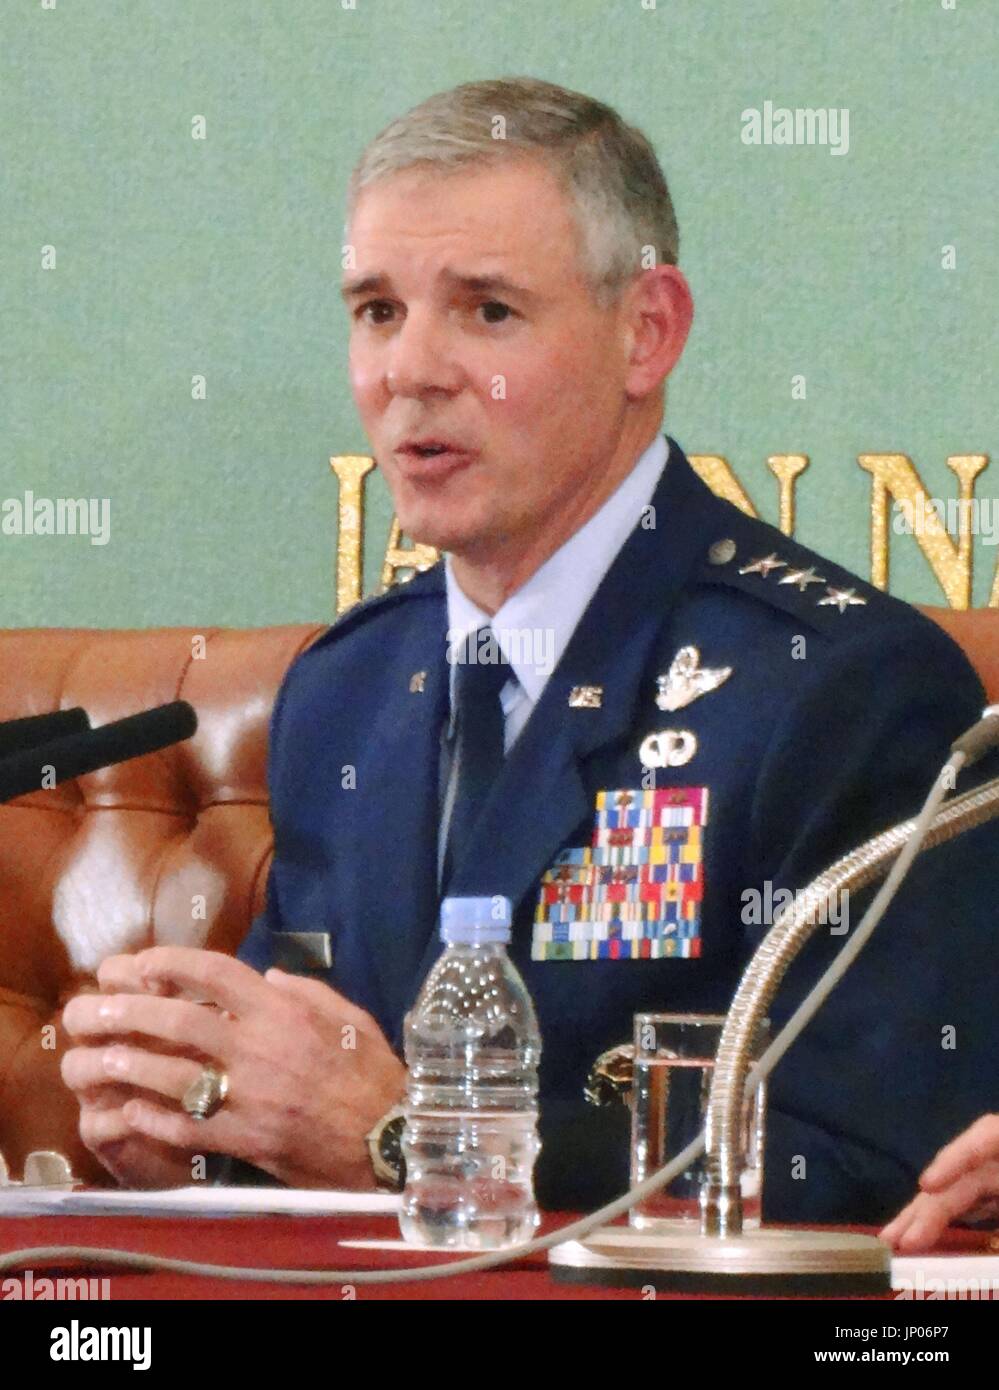 TOKYO, Japan - Lt. Gen. Salvatore Angelella, commander of U.S. forces in Japan, holds a news conference in Tokyo on Dec. 6, 2012. (Kyodo) Stock Photo